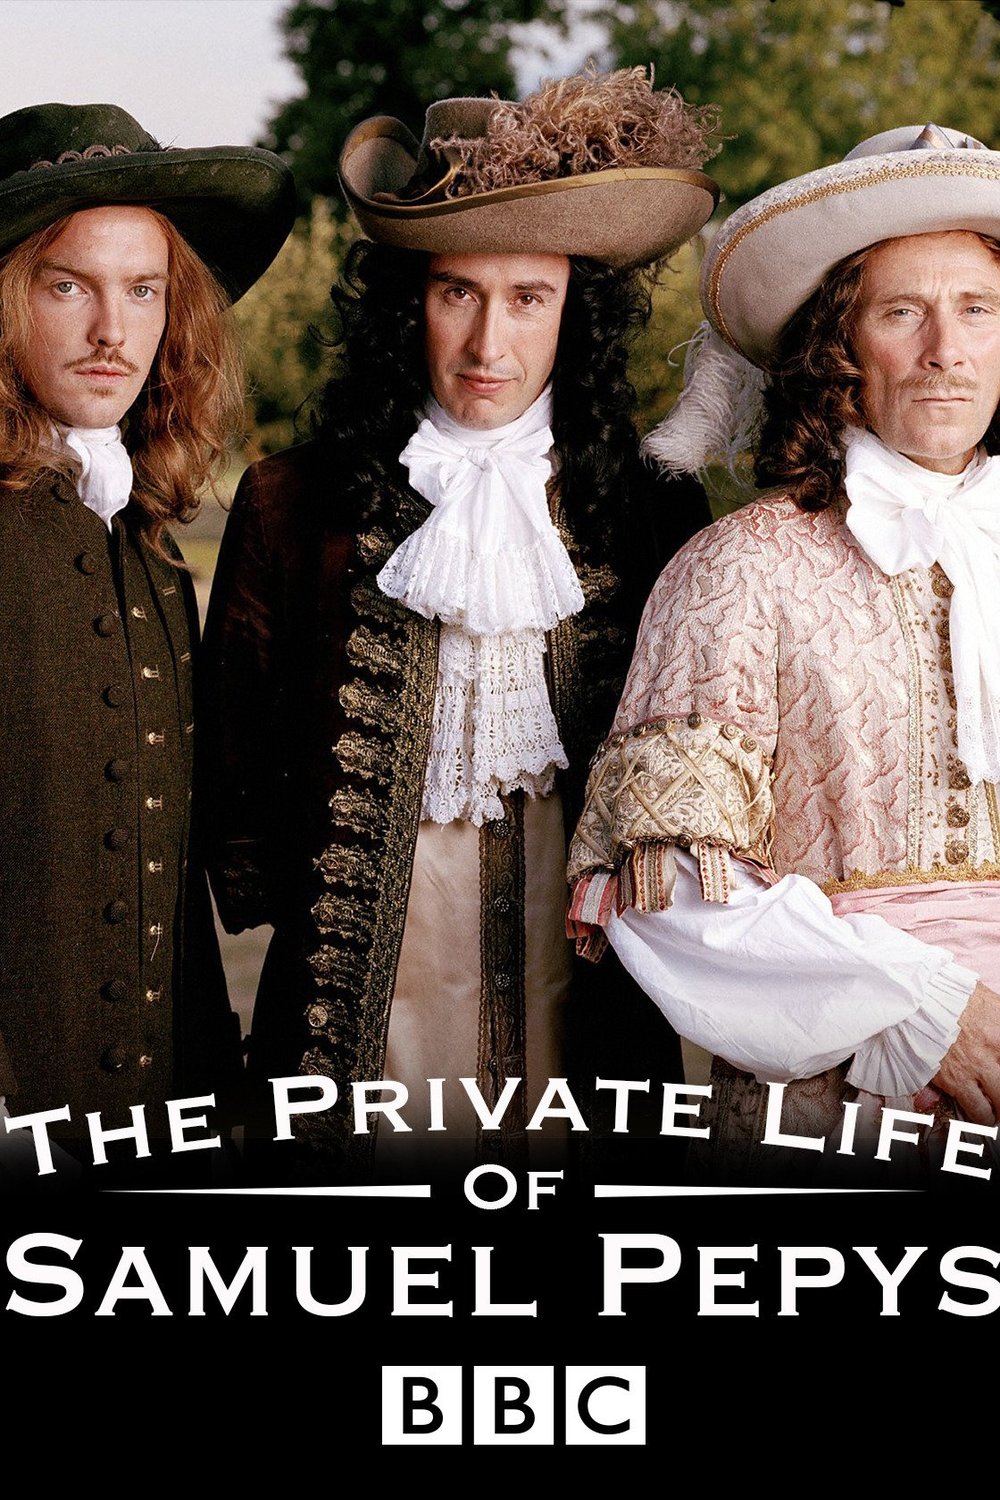 Poster of the movie The Private Life of Samuel Pepys